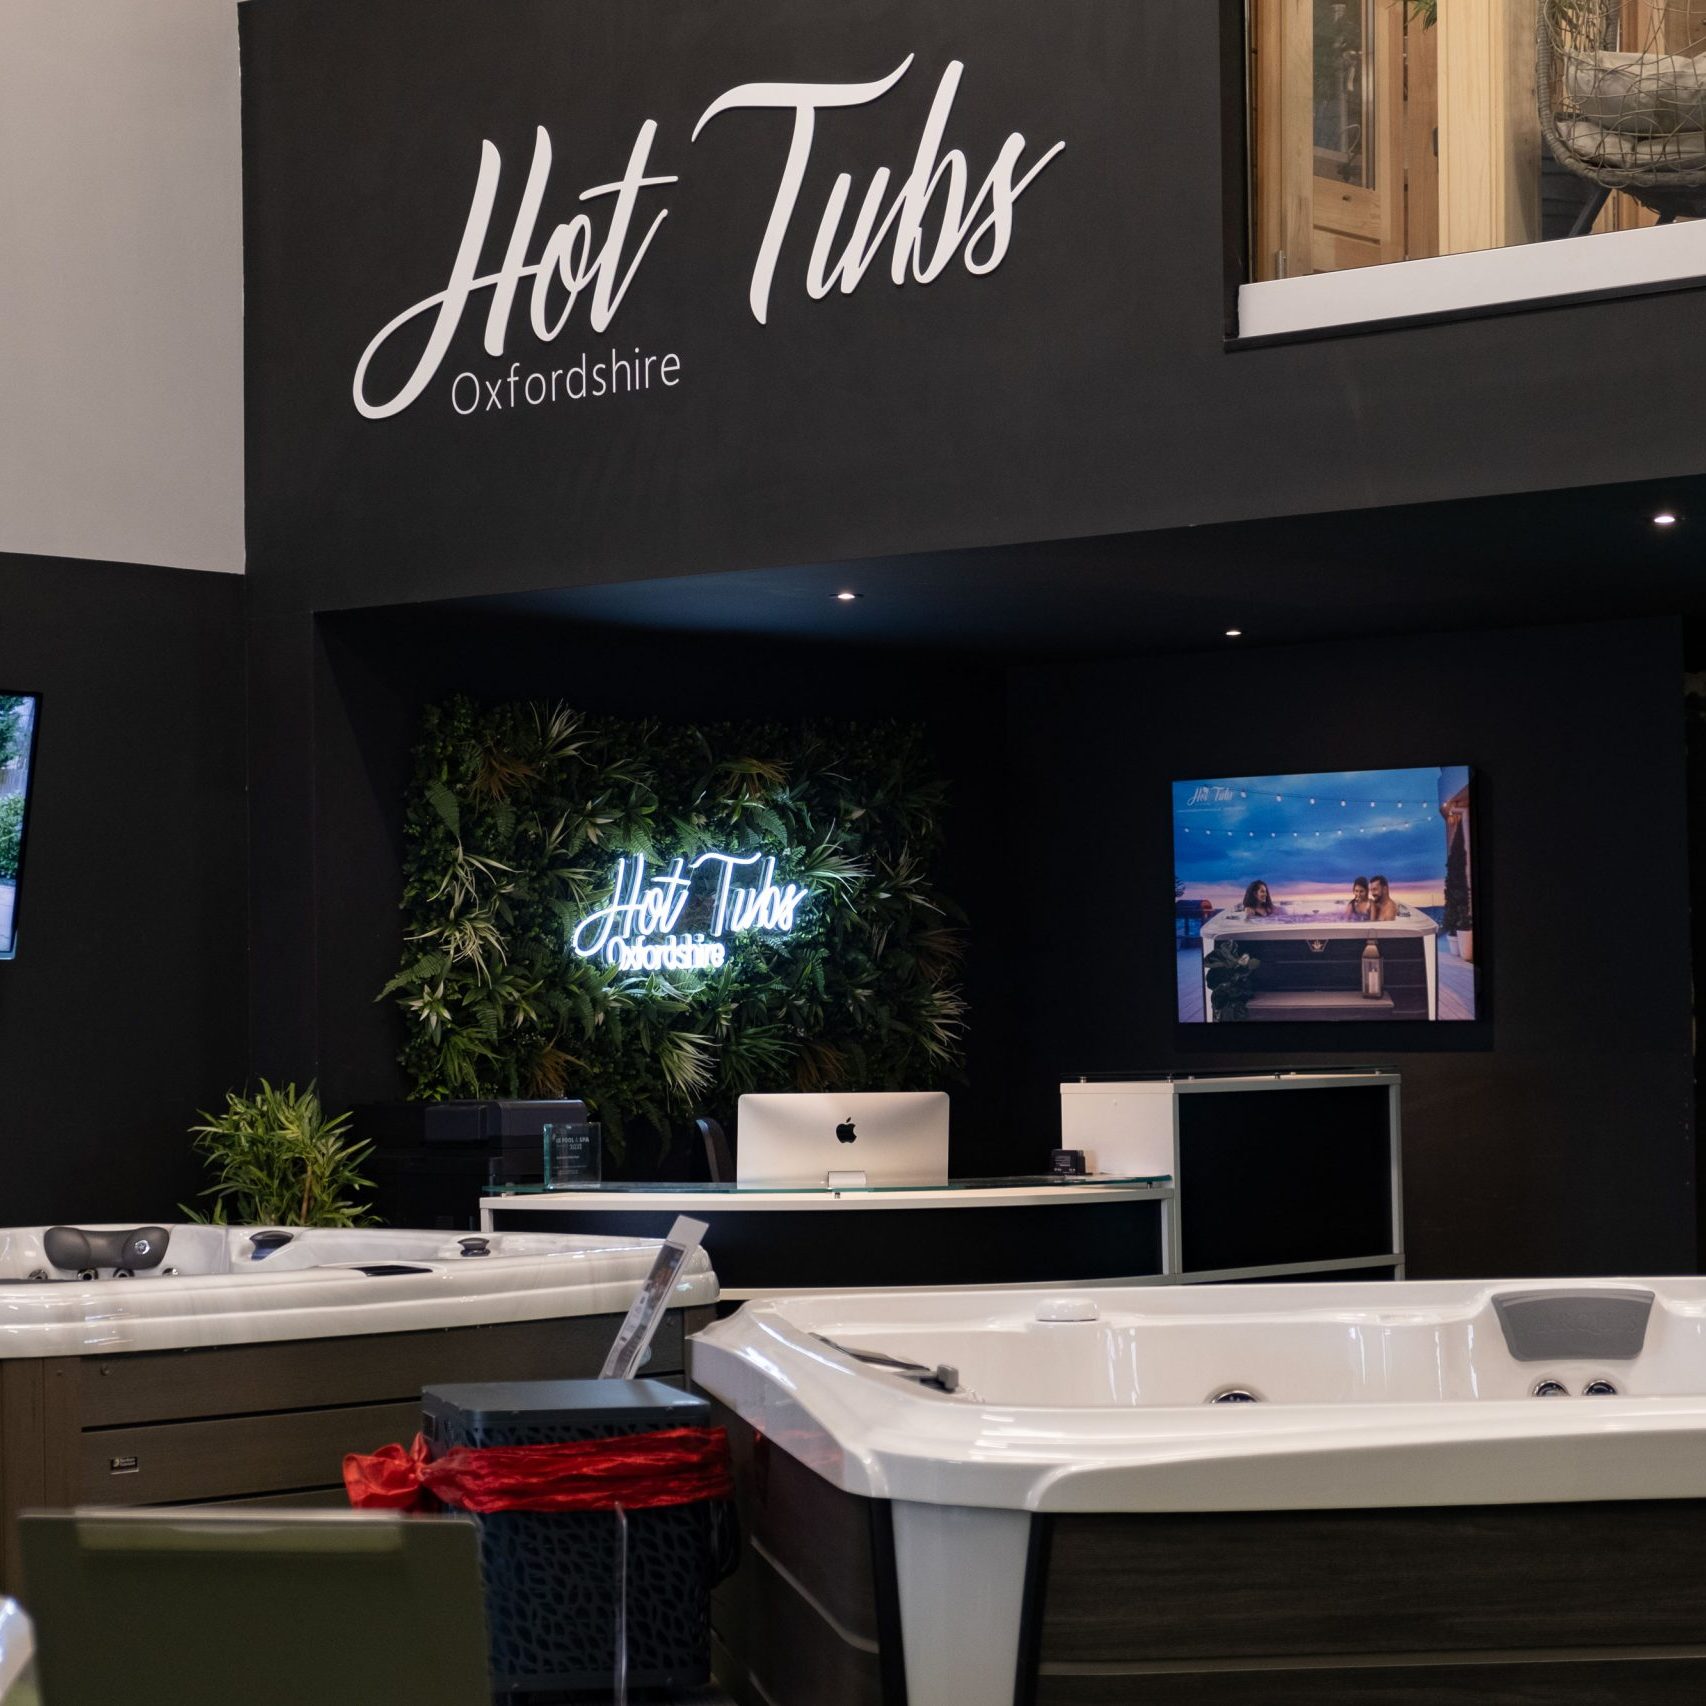 A view inside the Hot Tubs Oxfordshire showroom showing three hot tubs with te reception desk in the background